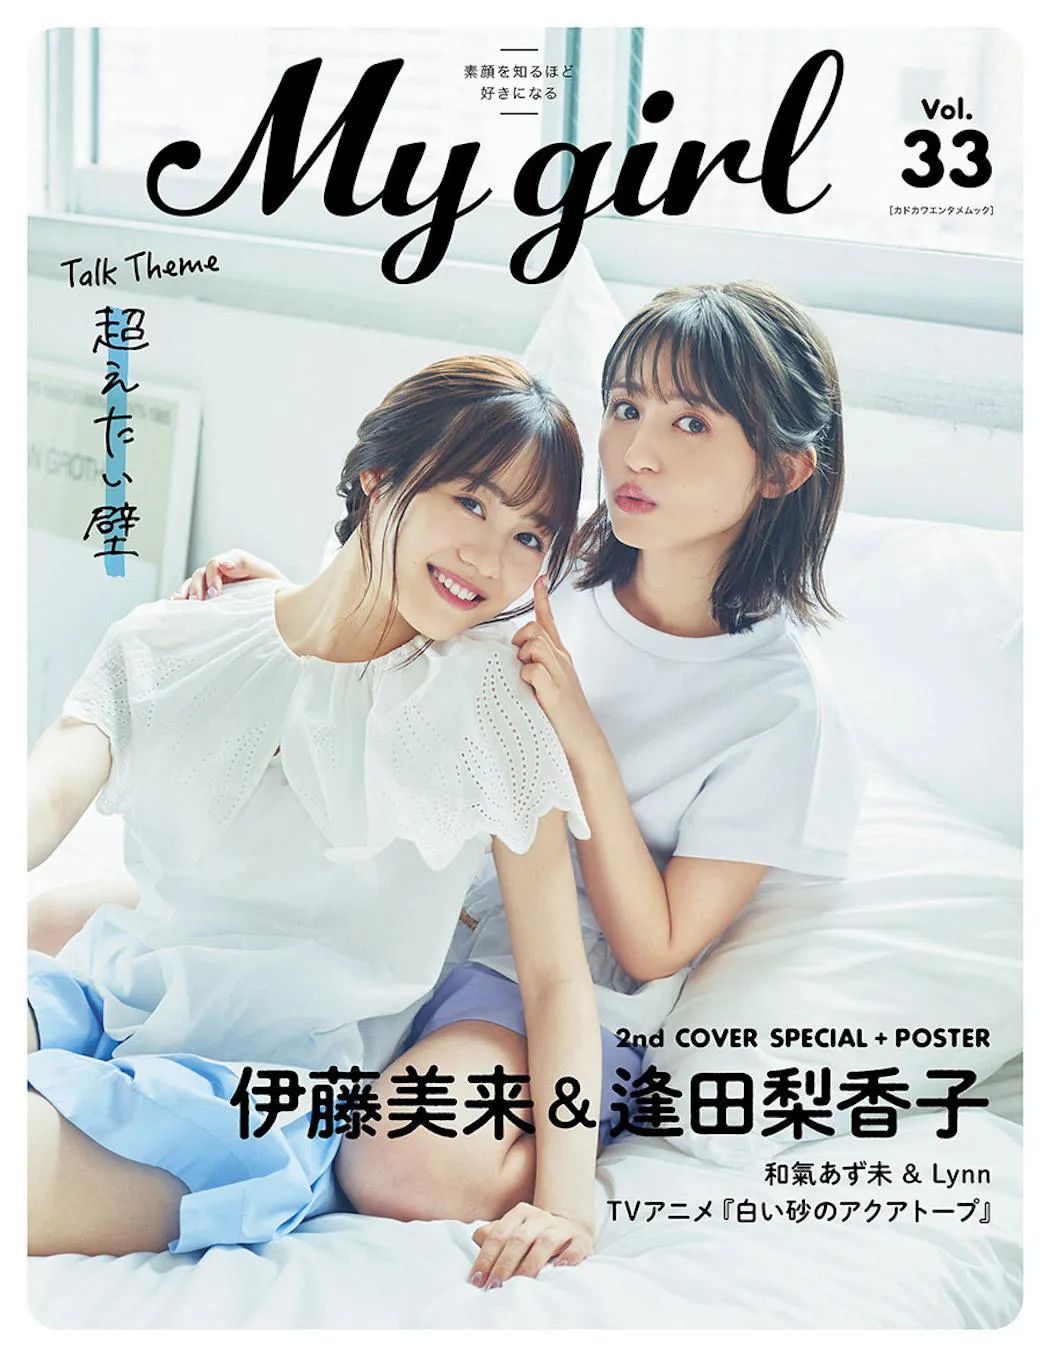 「My Girl vol.33」2nd Cover（裏表紙）